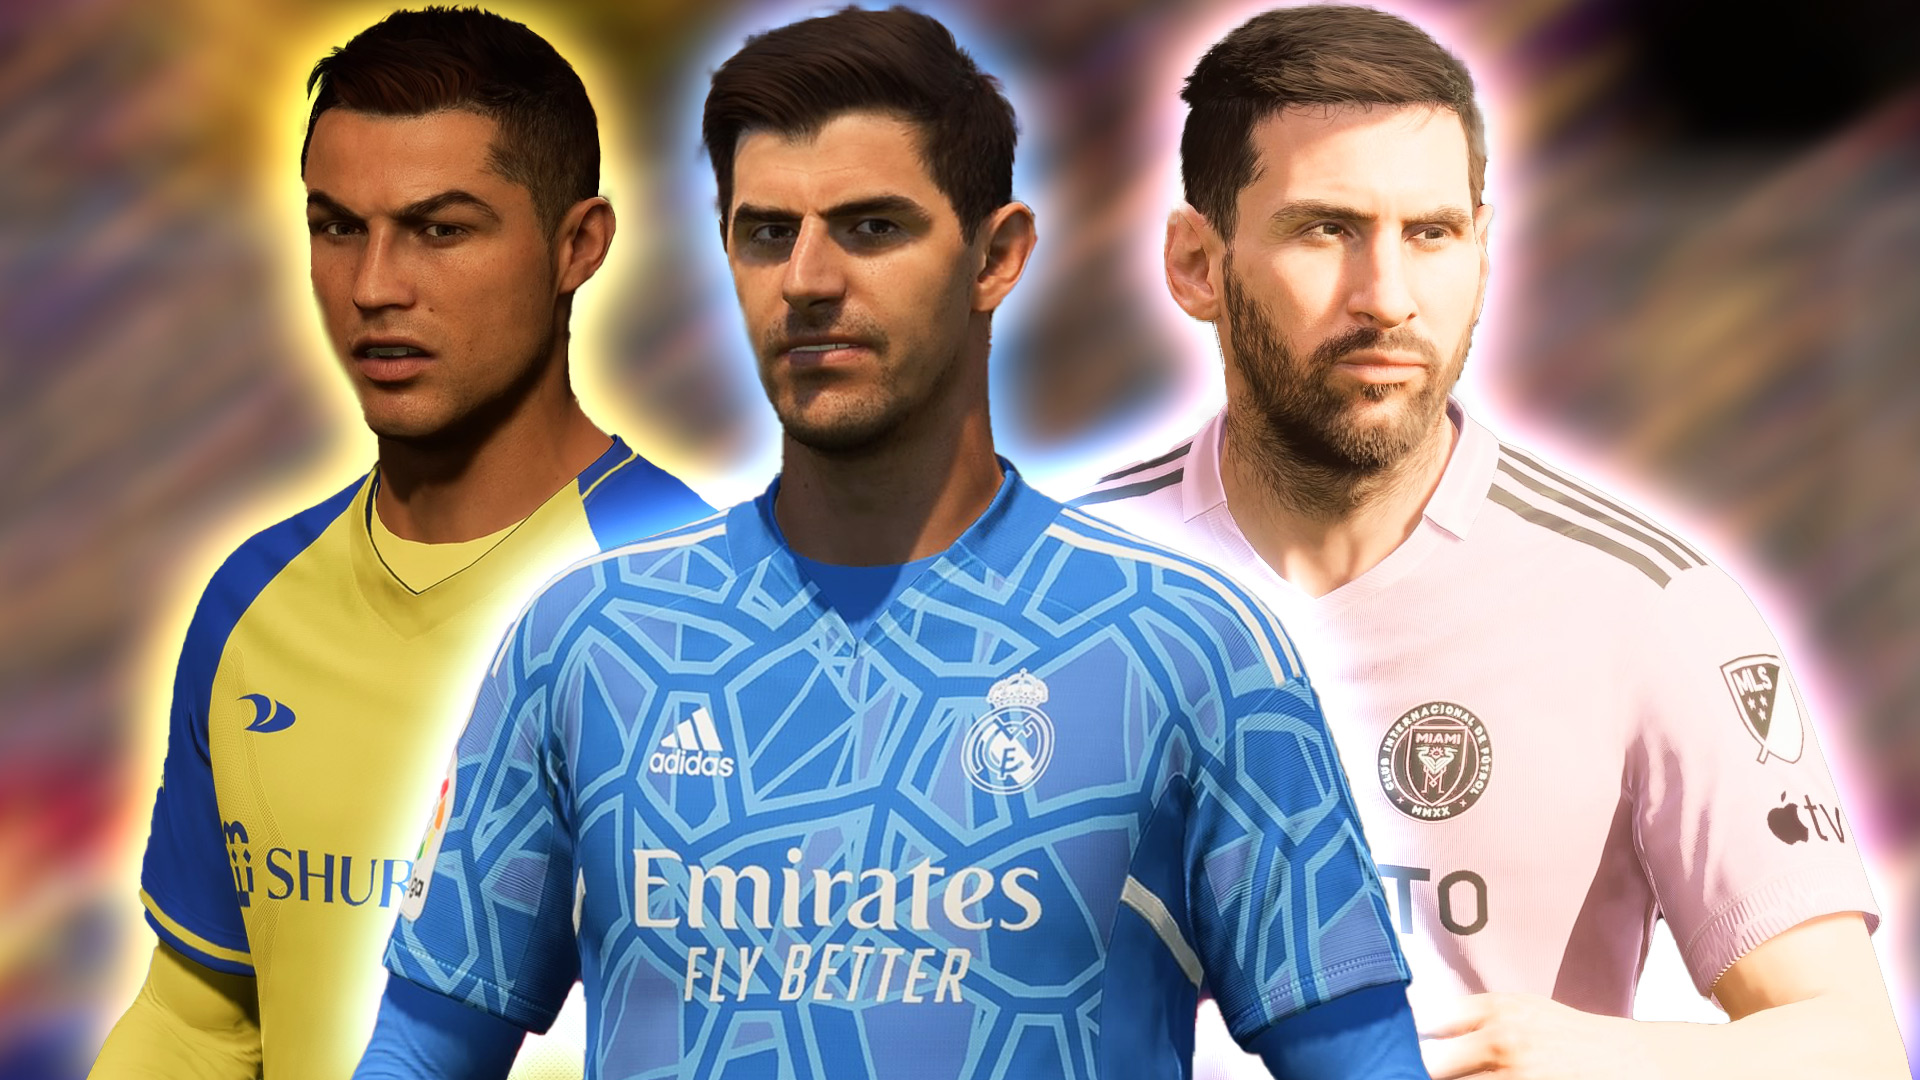 EA FC 24: All Leagues And Clubs In The New FIFA 24